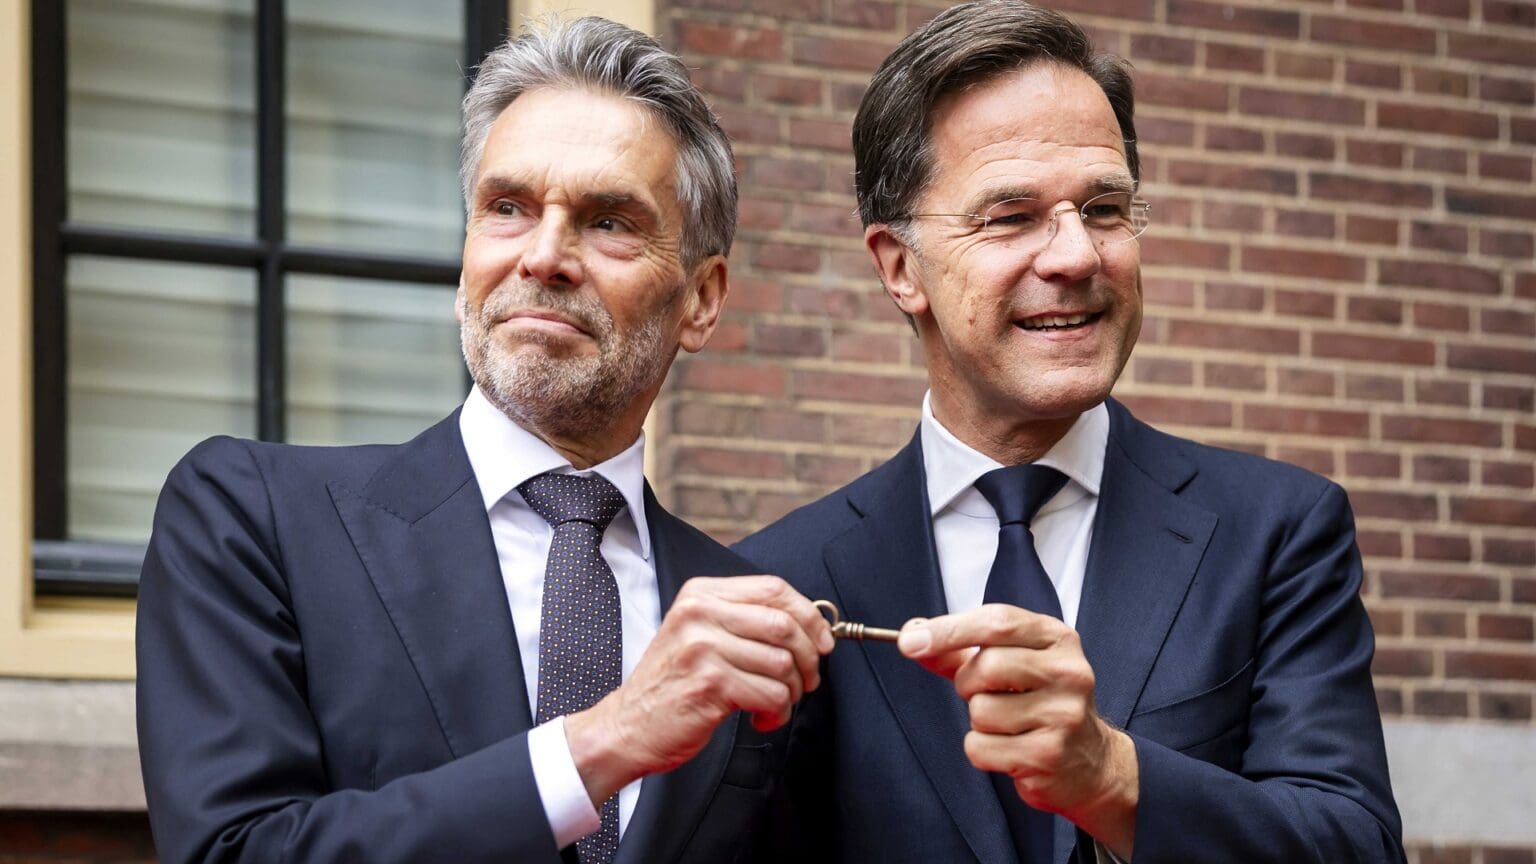 New Dutch Prime Minister Sworn Into Office